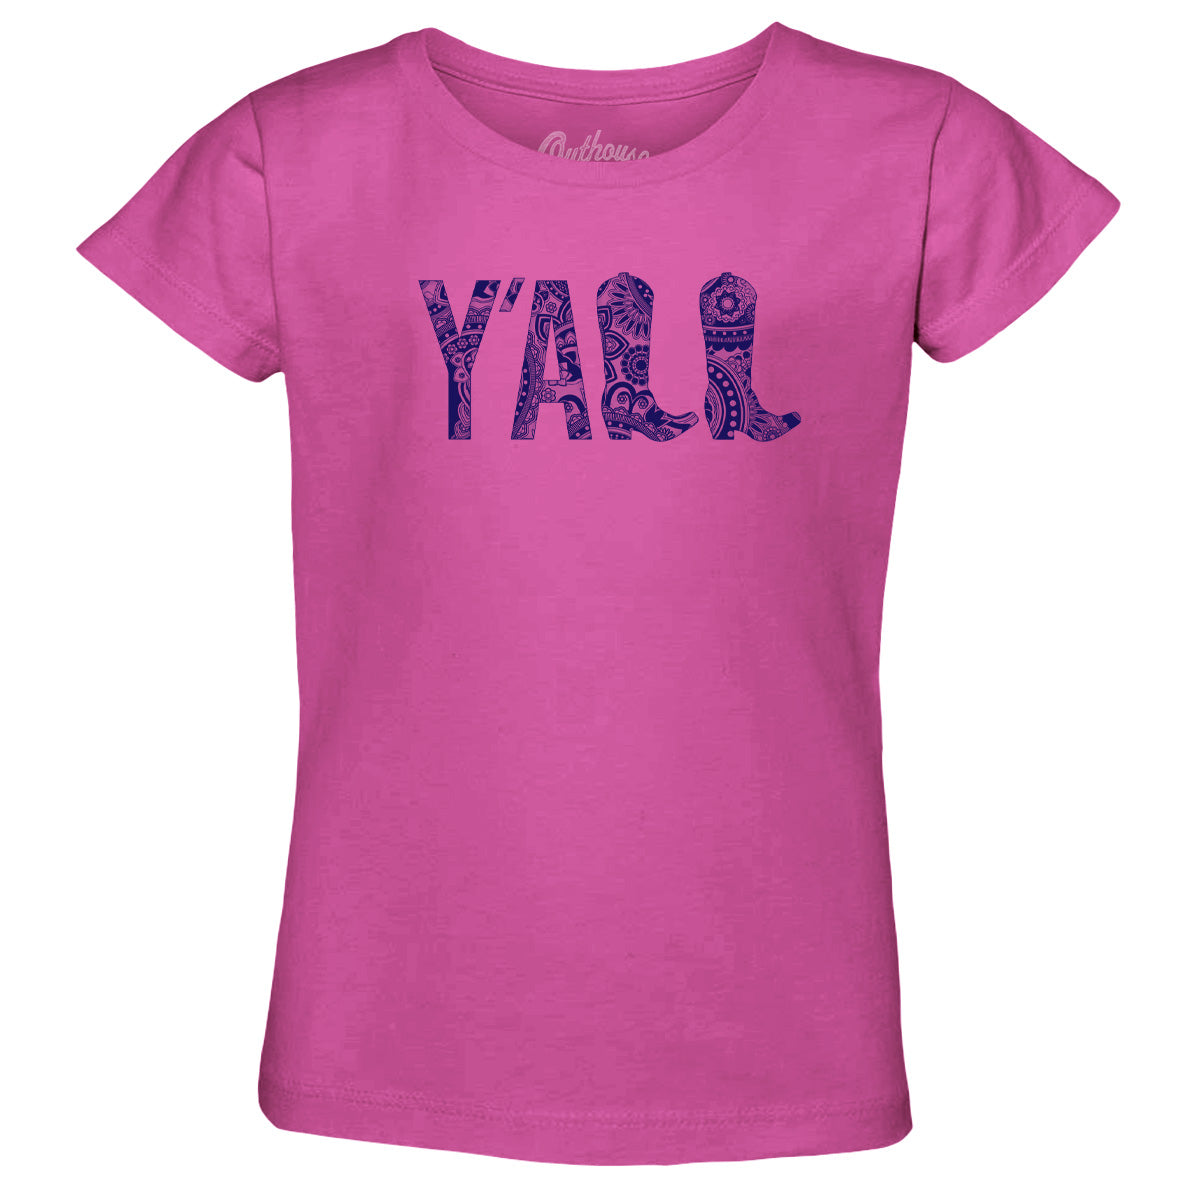 Y'all Youth Tee